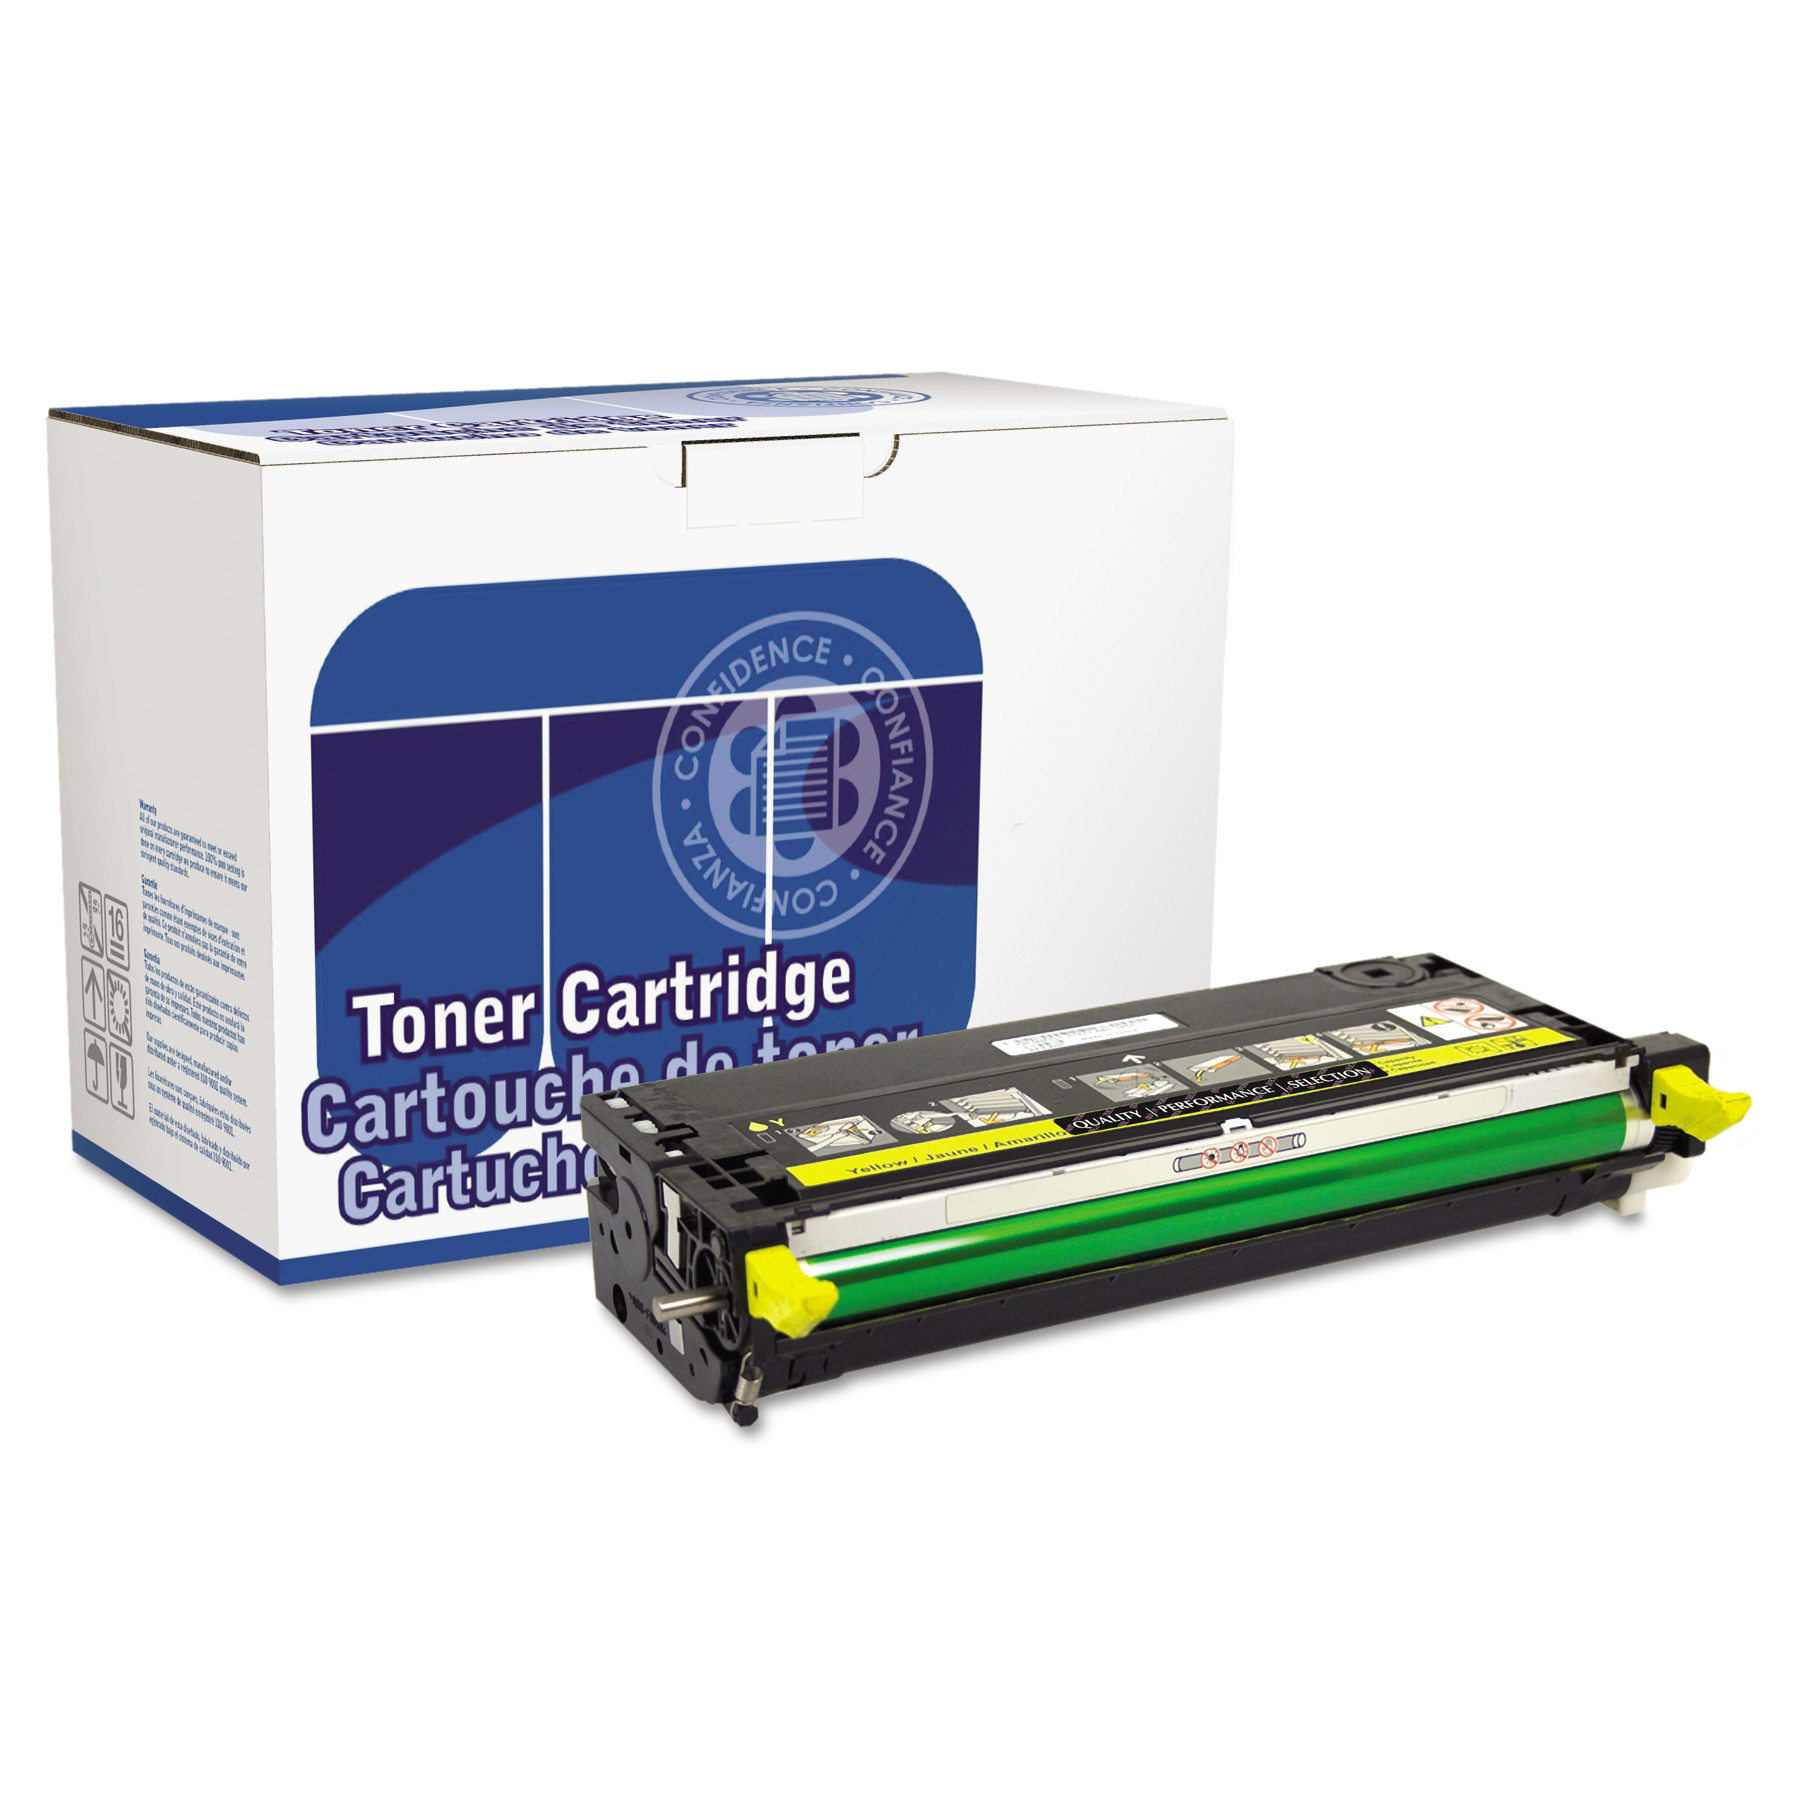 Dataproducts Remanufactured 310-8401 (3115Y) High-Yield Toner, 8,000 Page-Yield, Yellow - image 1 of 2